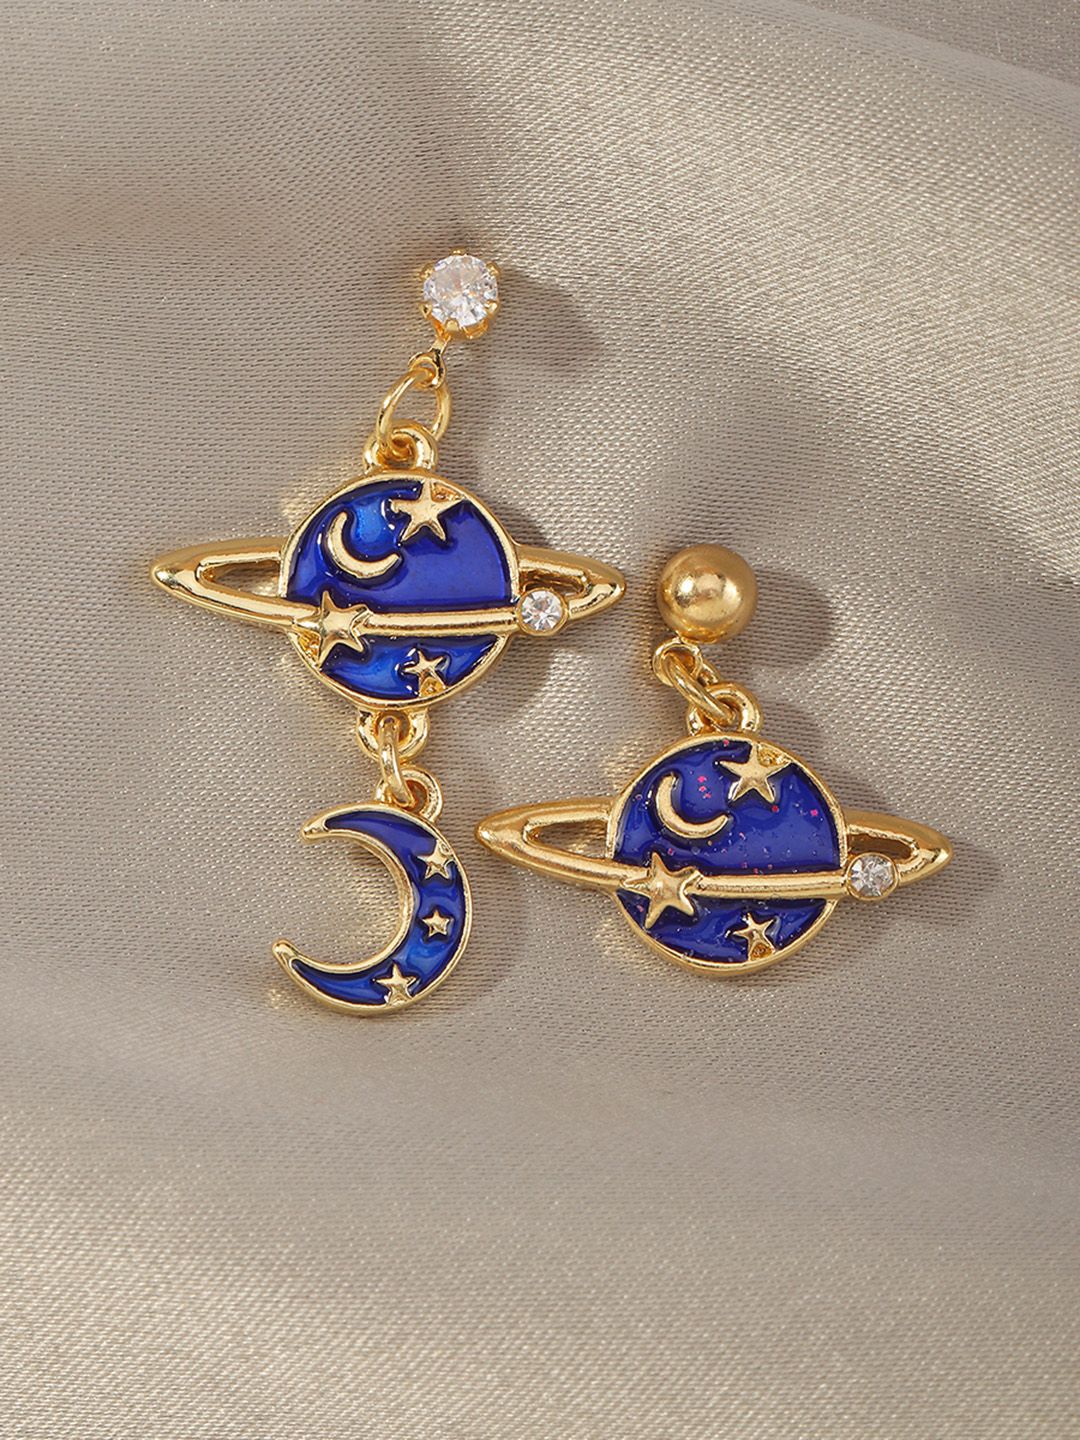 URBANIC Gold-Toned & Blue Set of 2 Crescent Shaped Drop Earrings Price in India